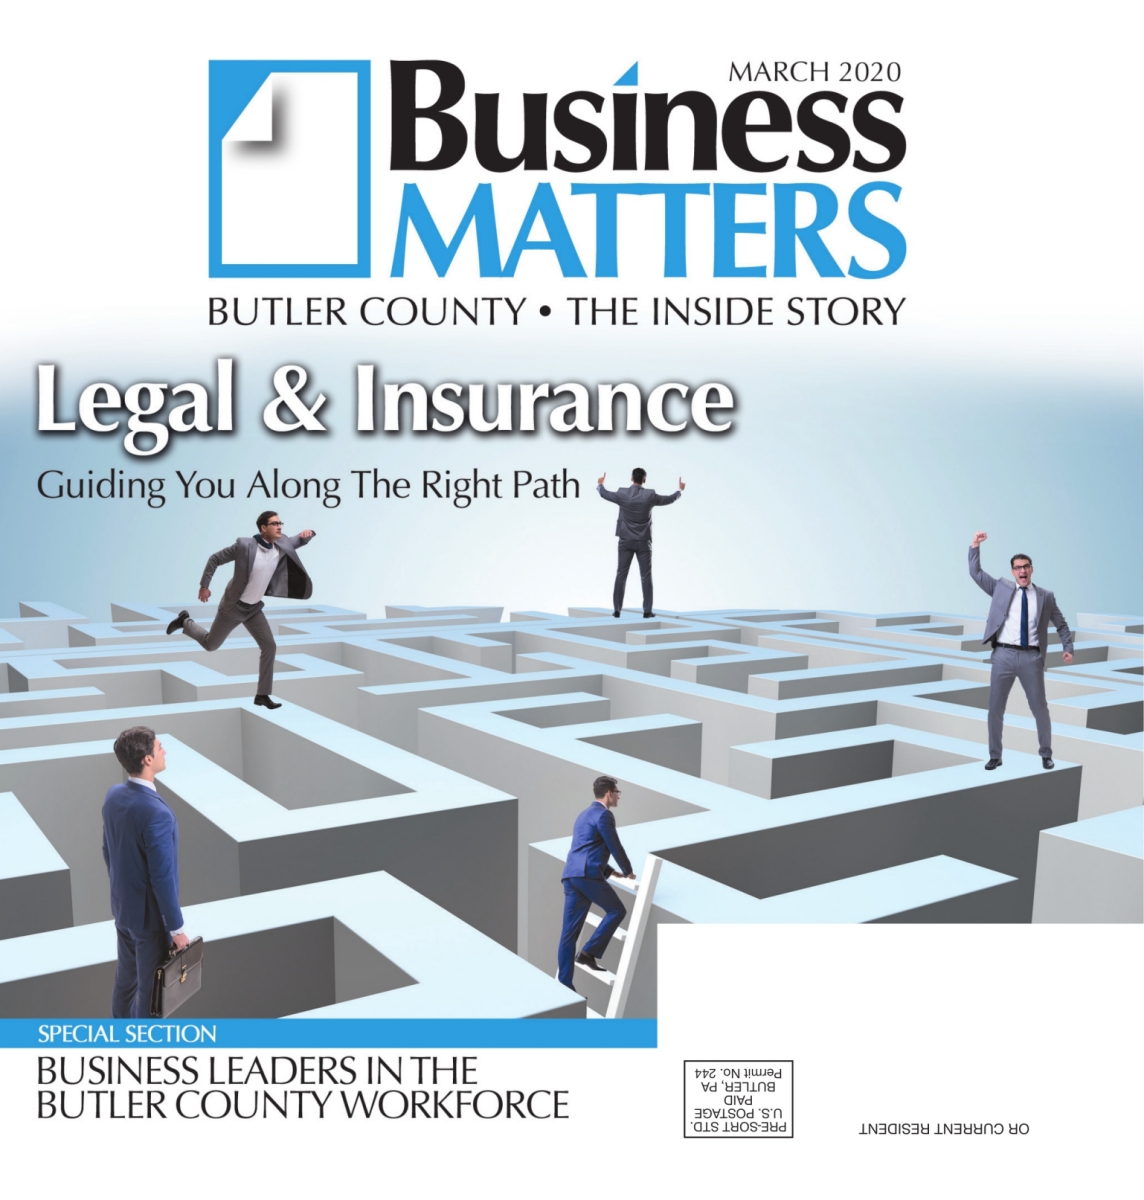 March 2020 - Legal & Insurance - Guiding You Along The Right Path